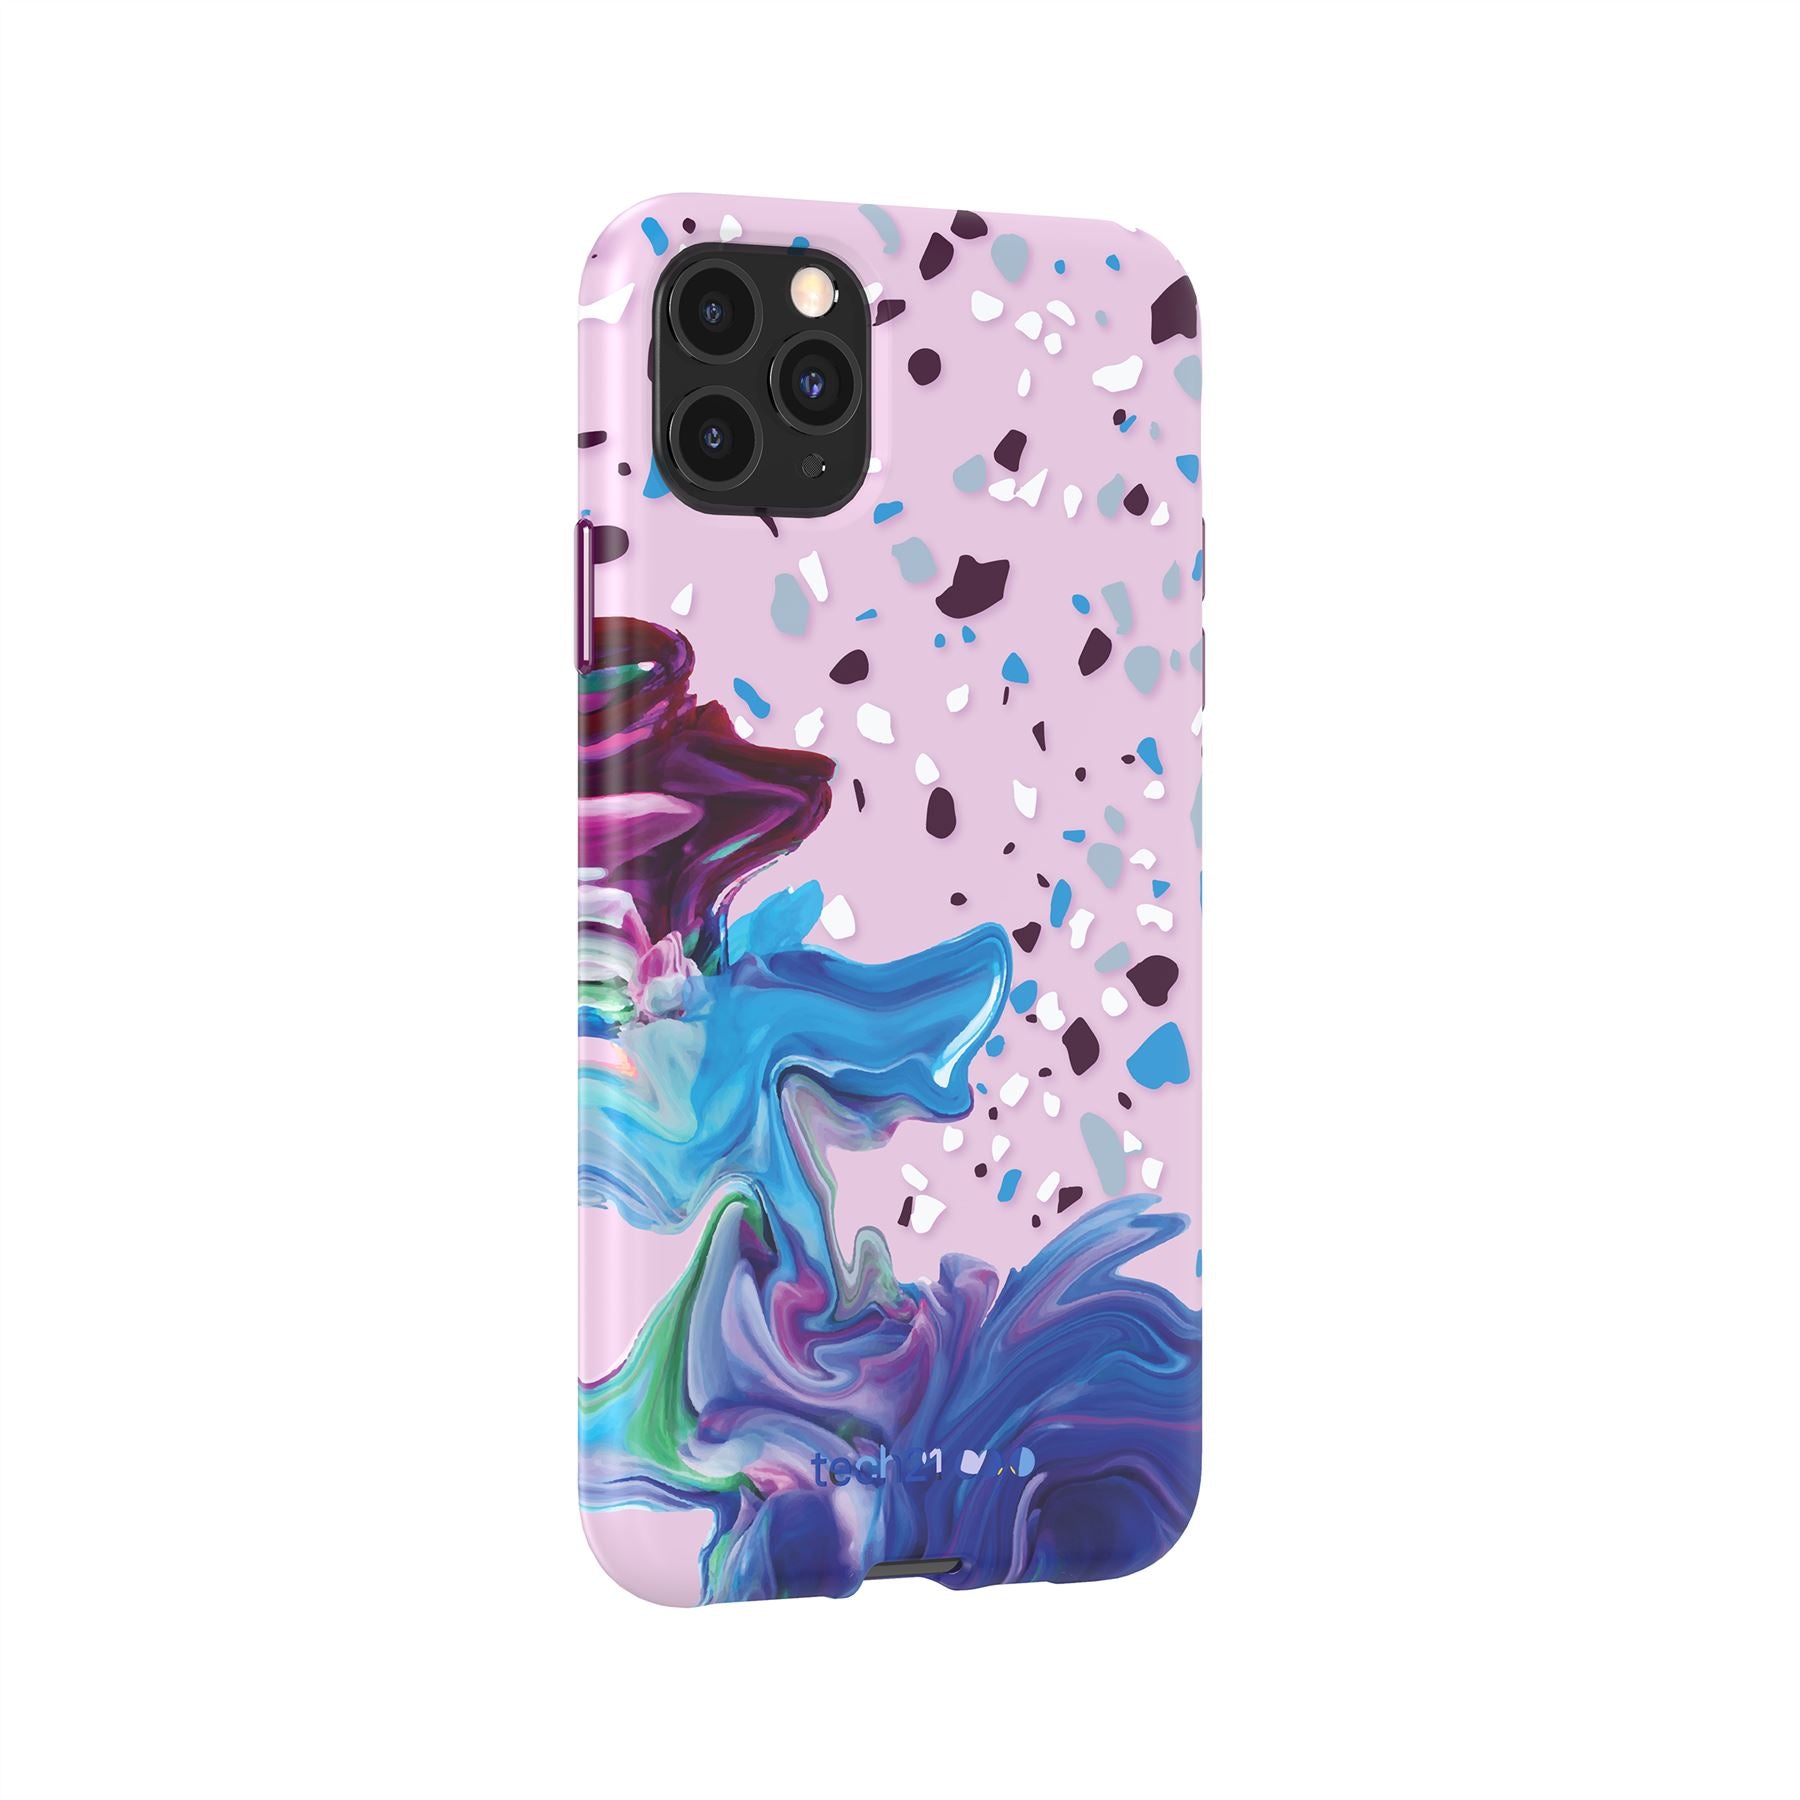 Remix in Motion - Apple iPhone 11 Pro Max Case - Orchid